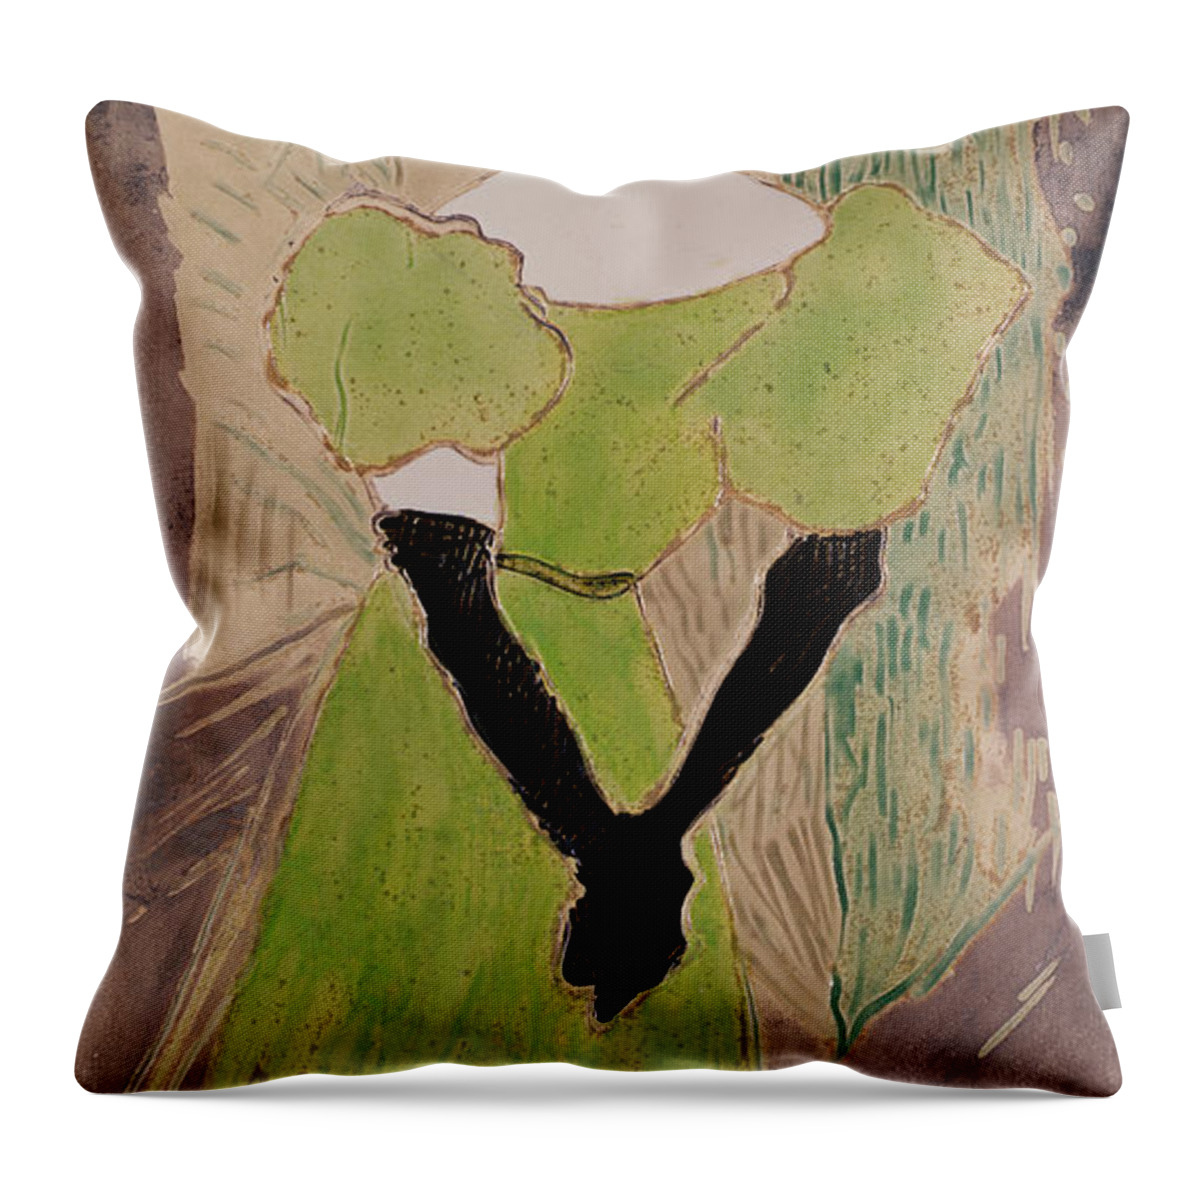 Female Throw Pillow featuring the painting Portrait Of Yvette Guilbert by Henri de Toulouse-Lautrec